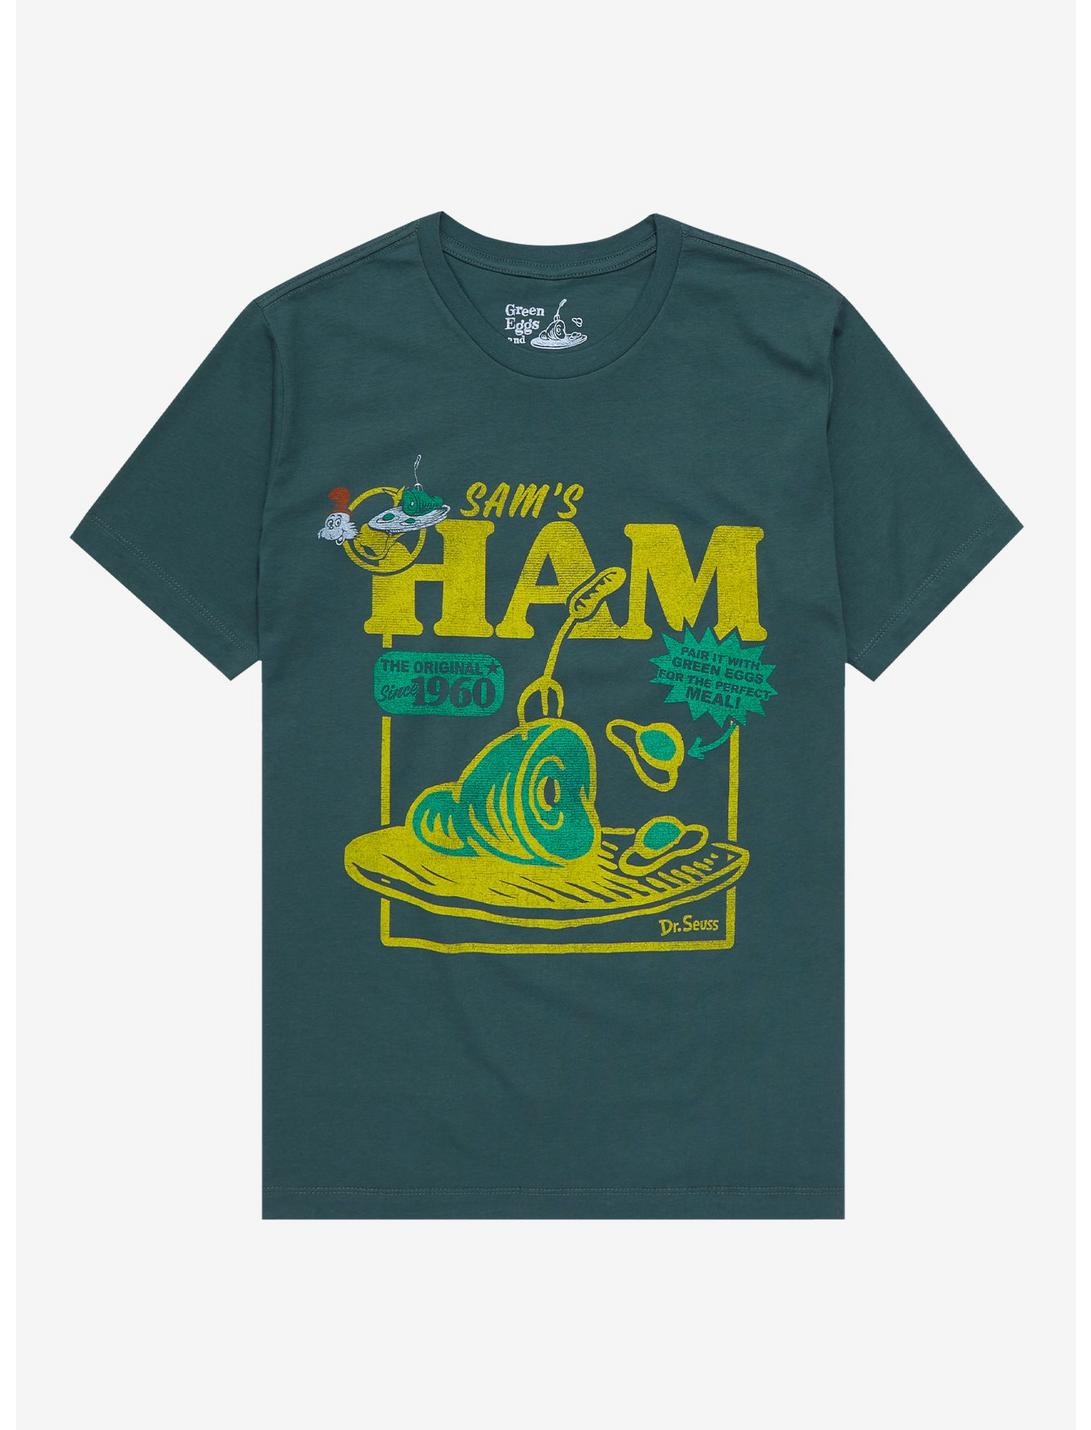 Dr. Seuss Green Eggs and Ham T-Shirt - BoxLunch Exclusive, GREEN, hi-res